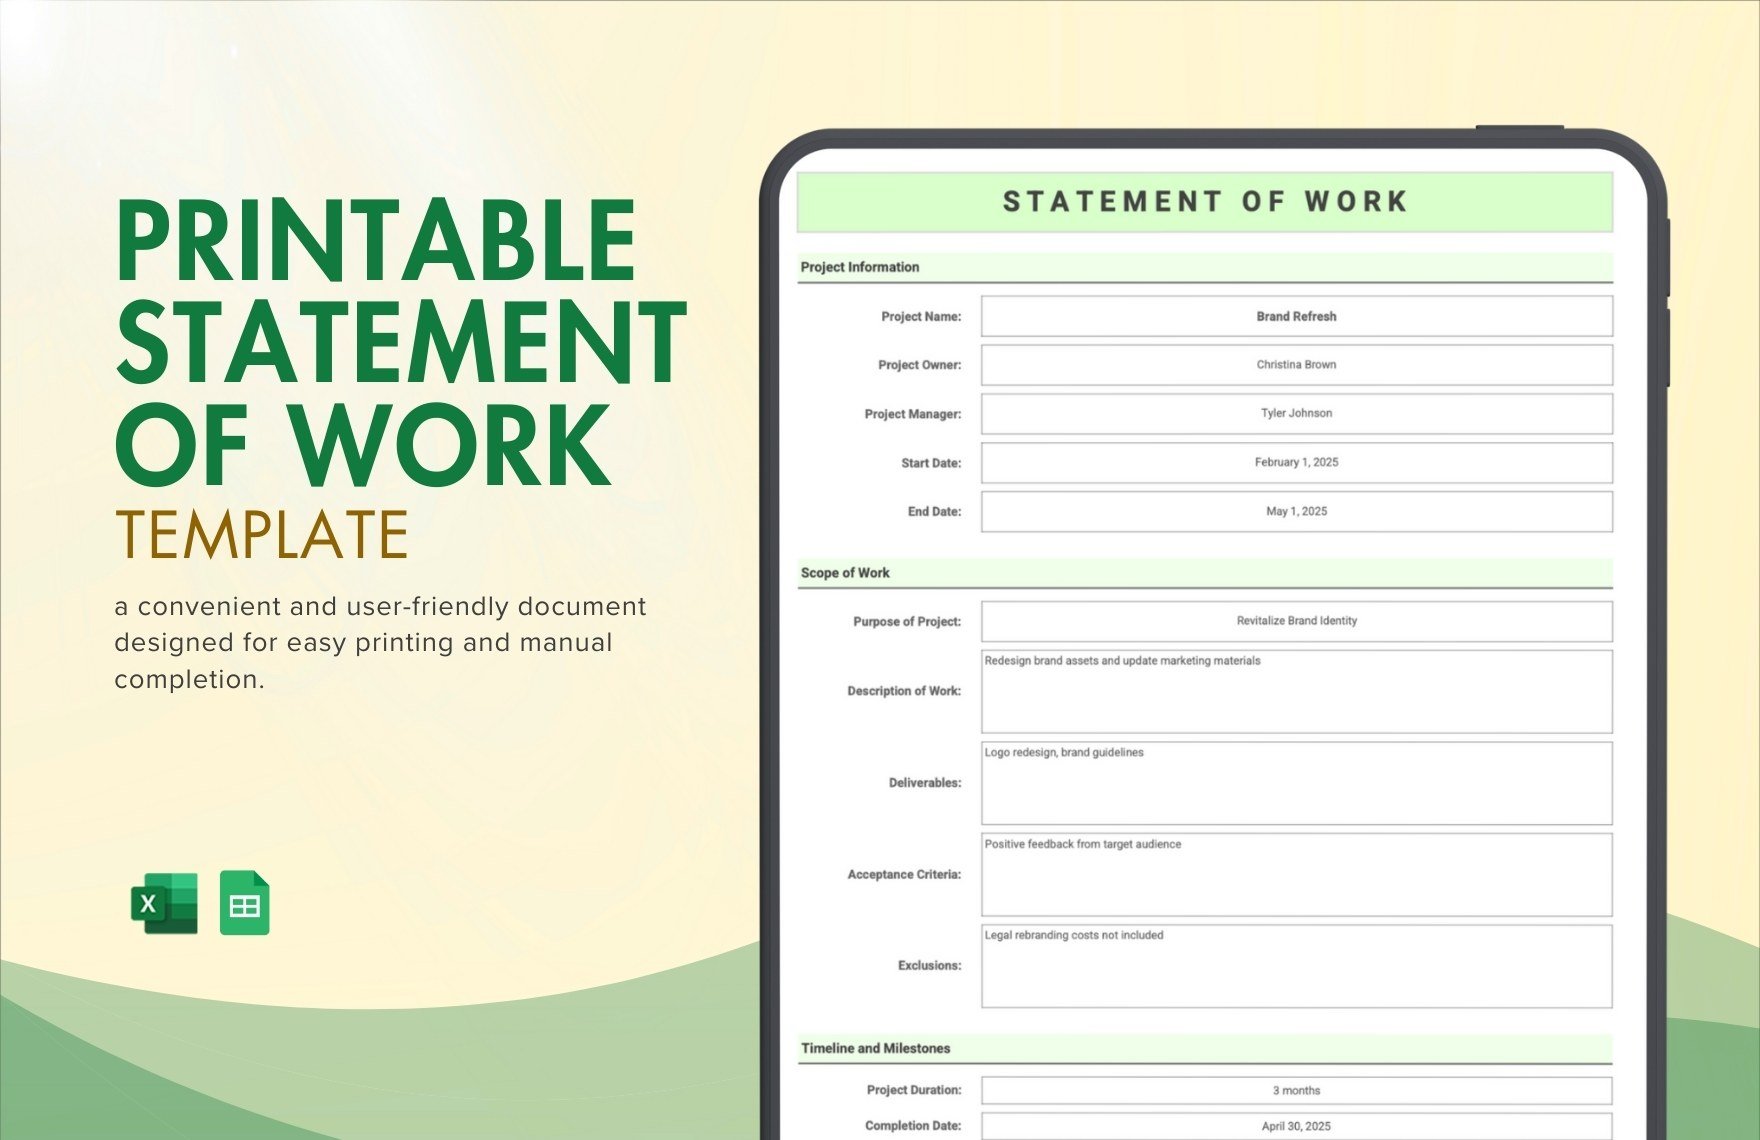 Printable Statement of Work Template